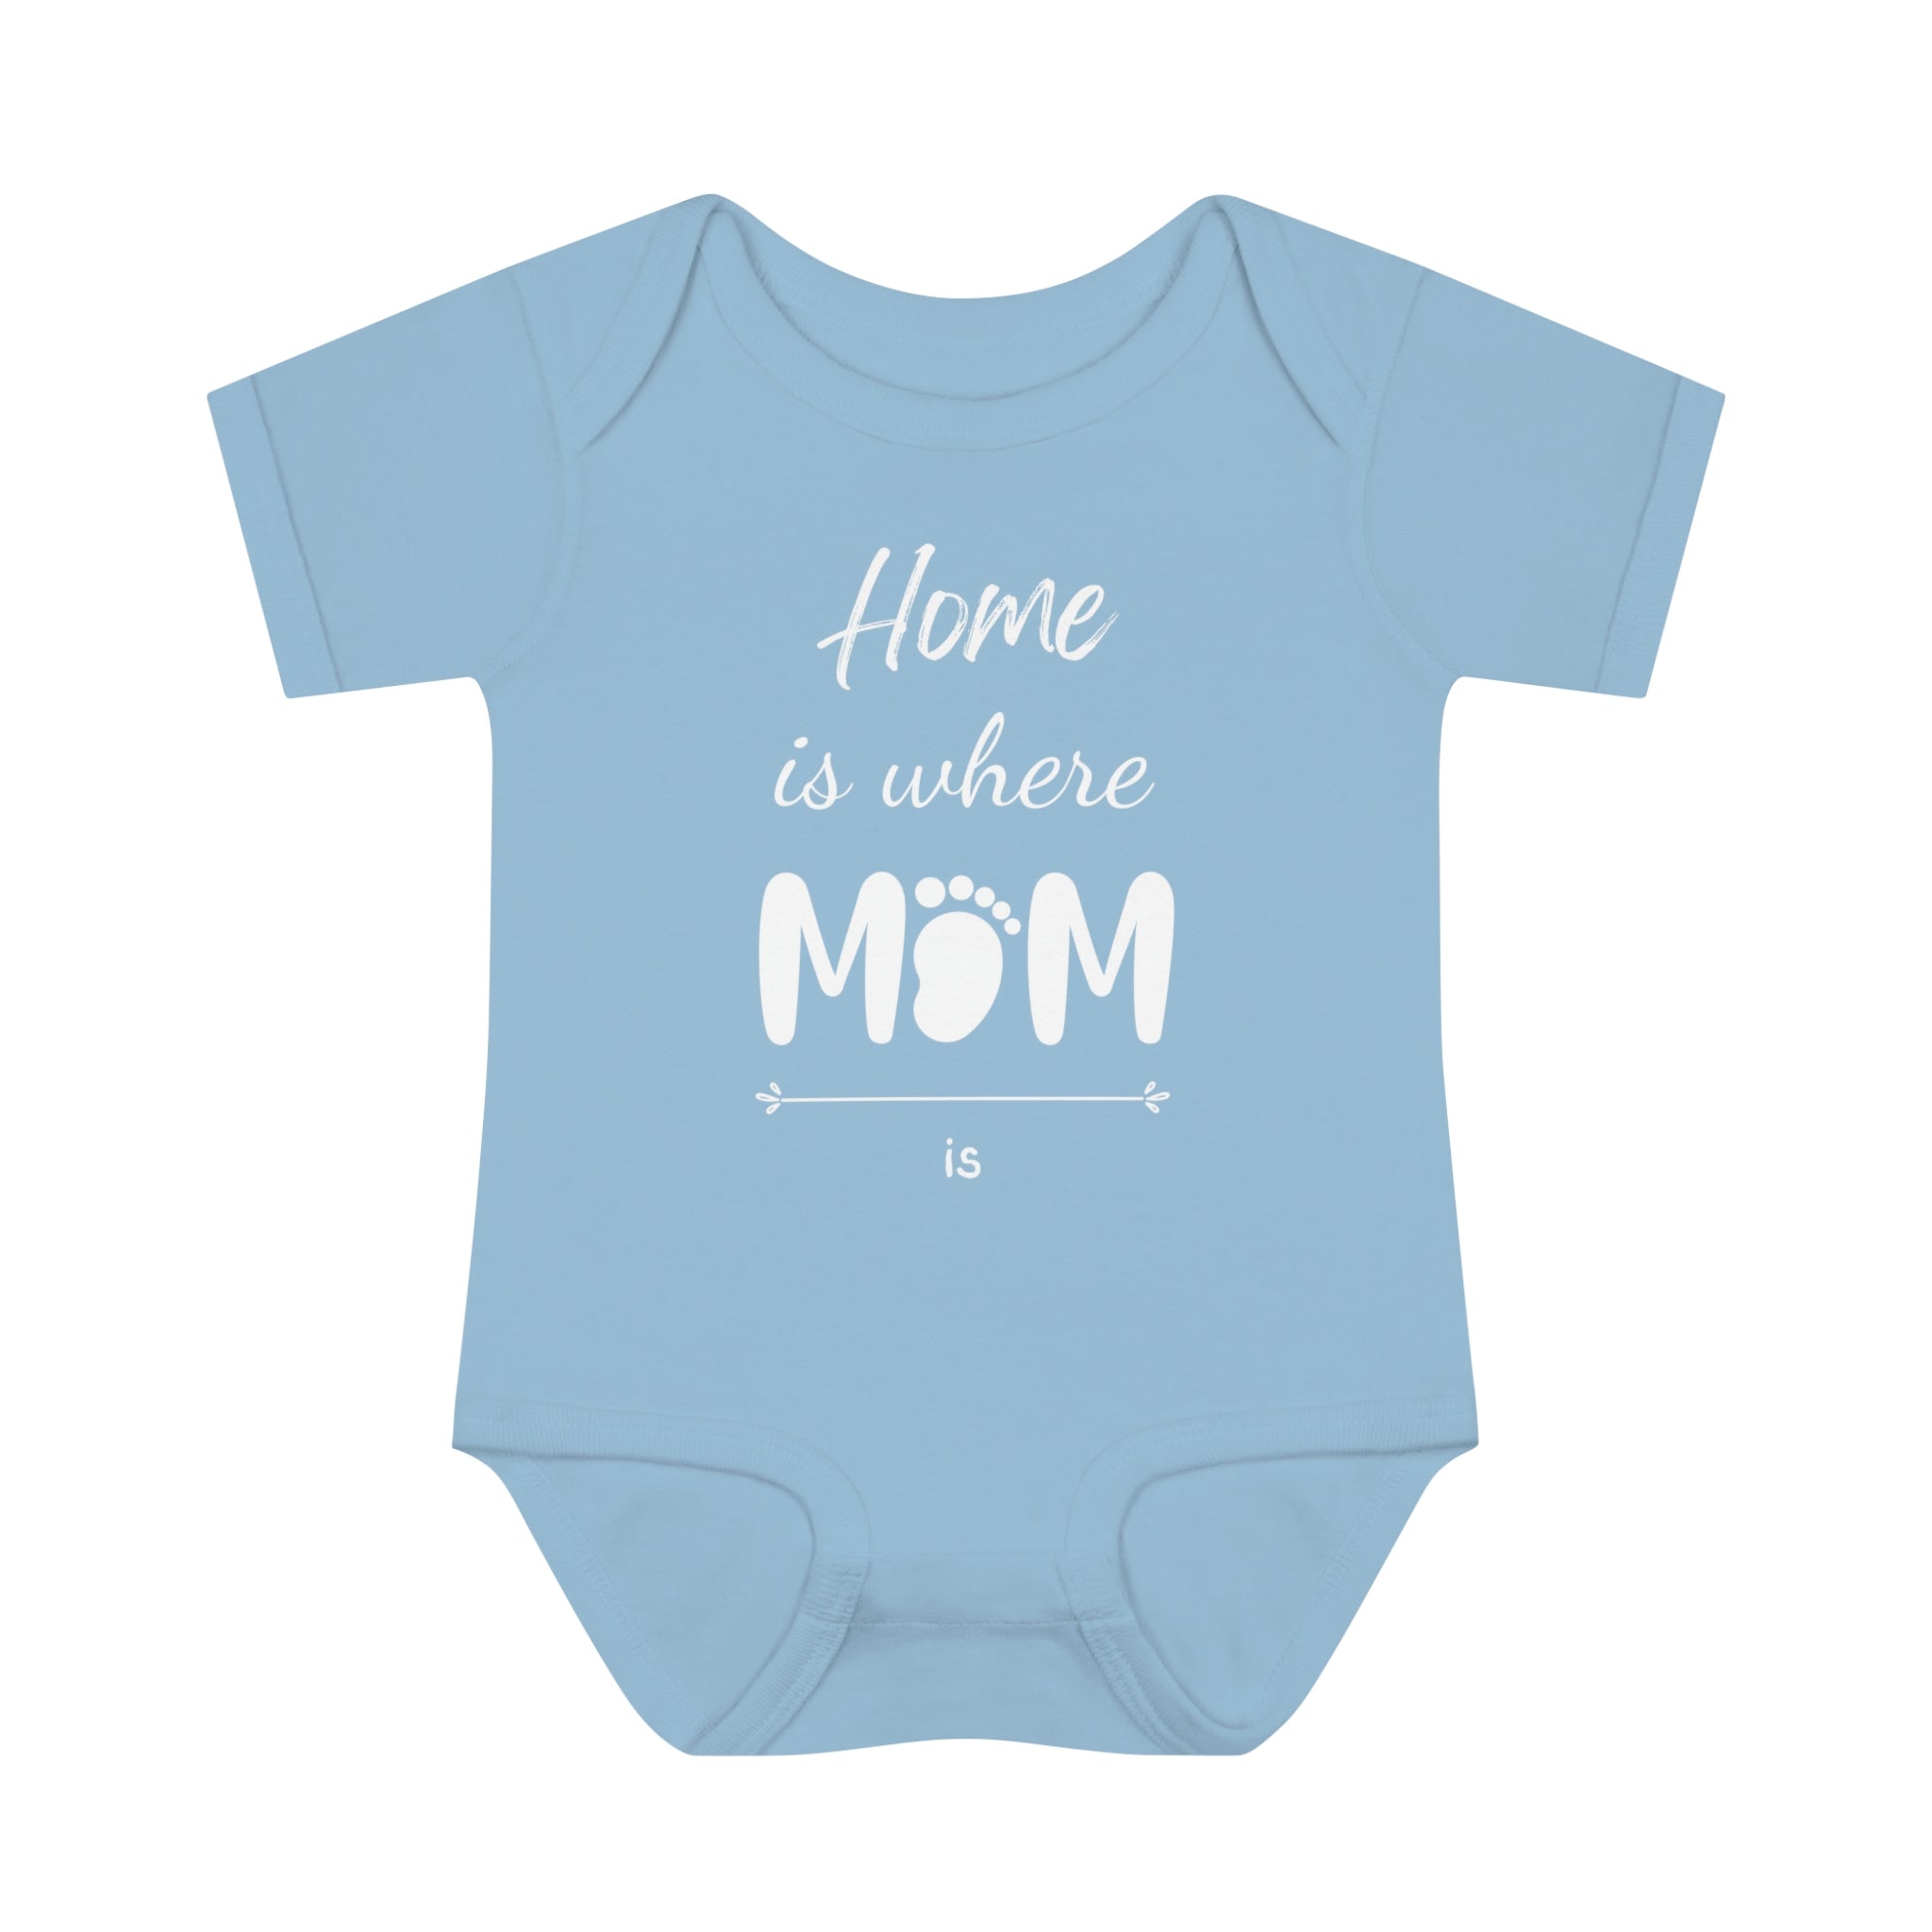 Home Is Where Mom Is Baby Bodysuit